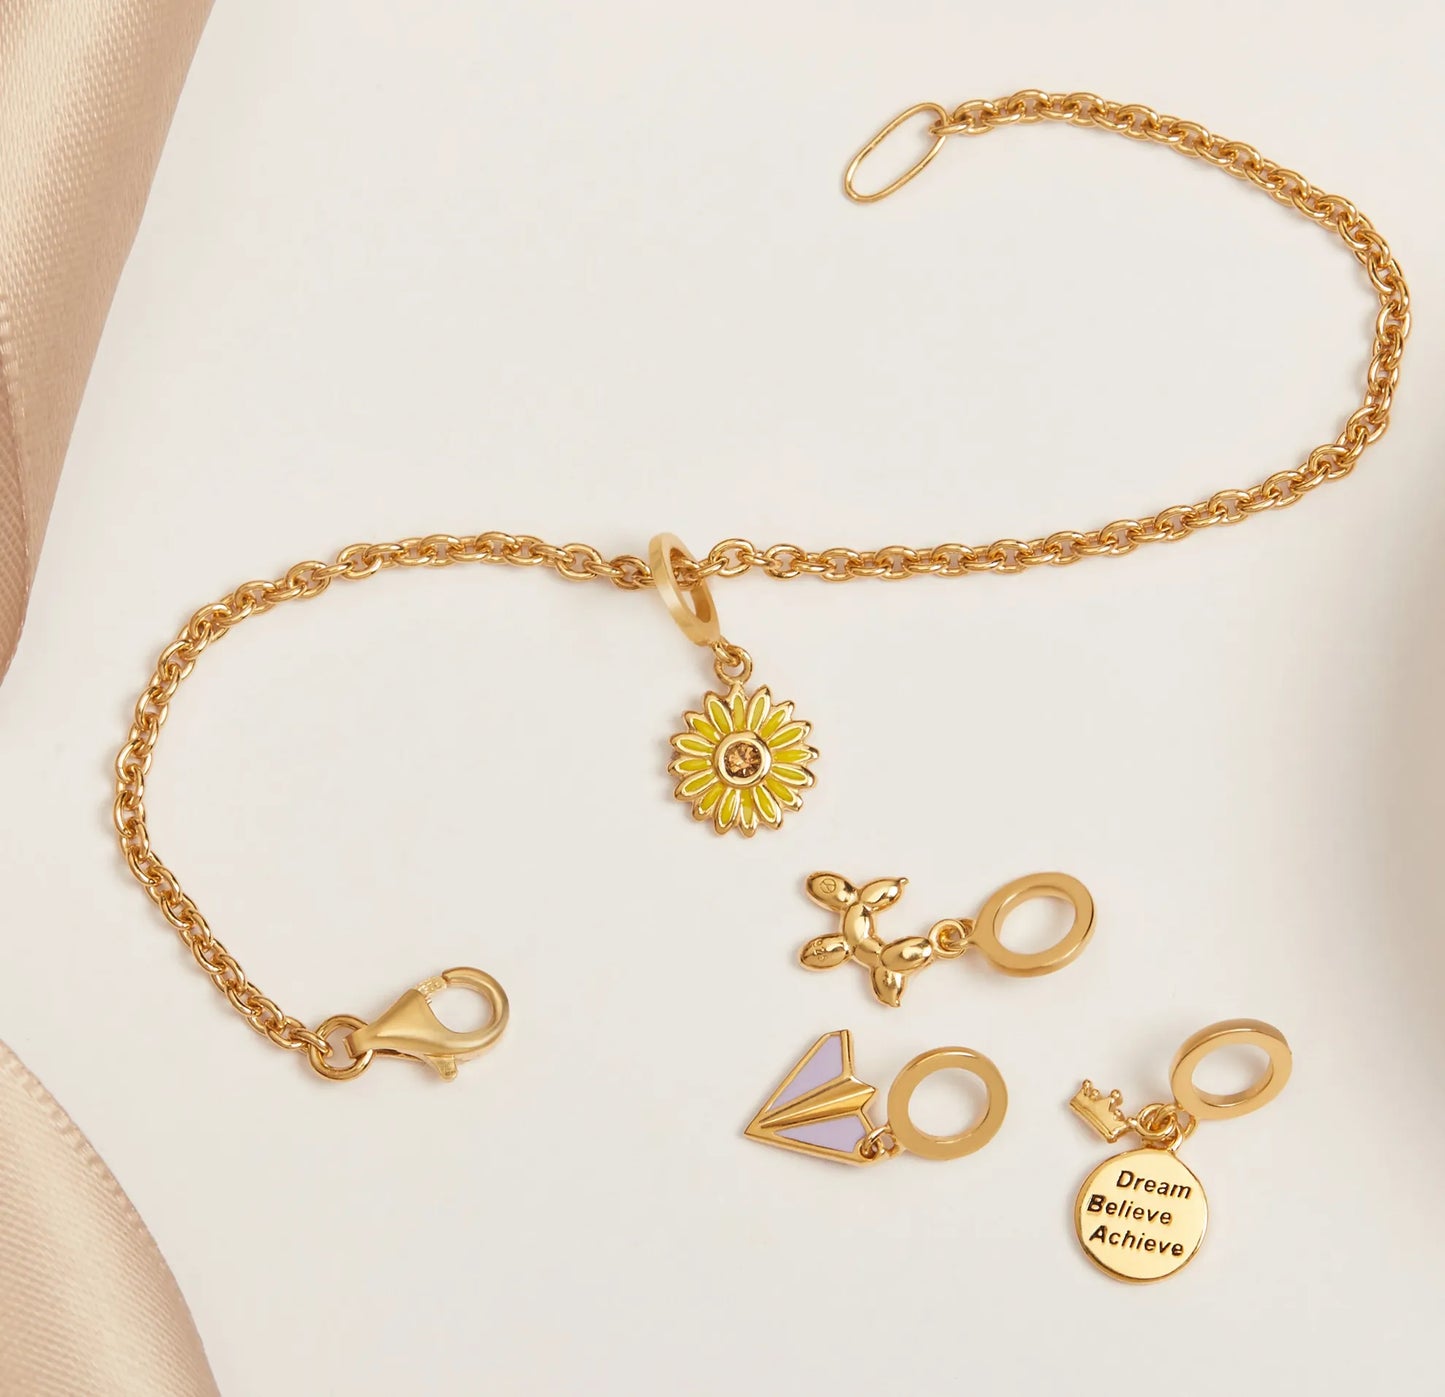 the-bright-sunflower-charm-gold